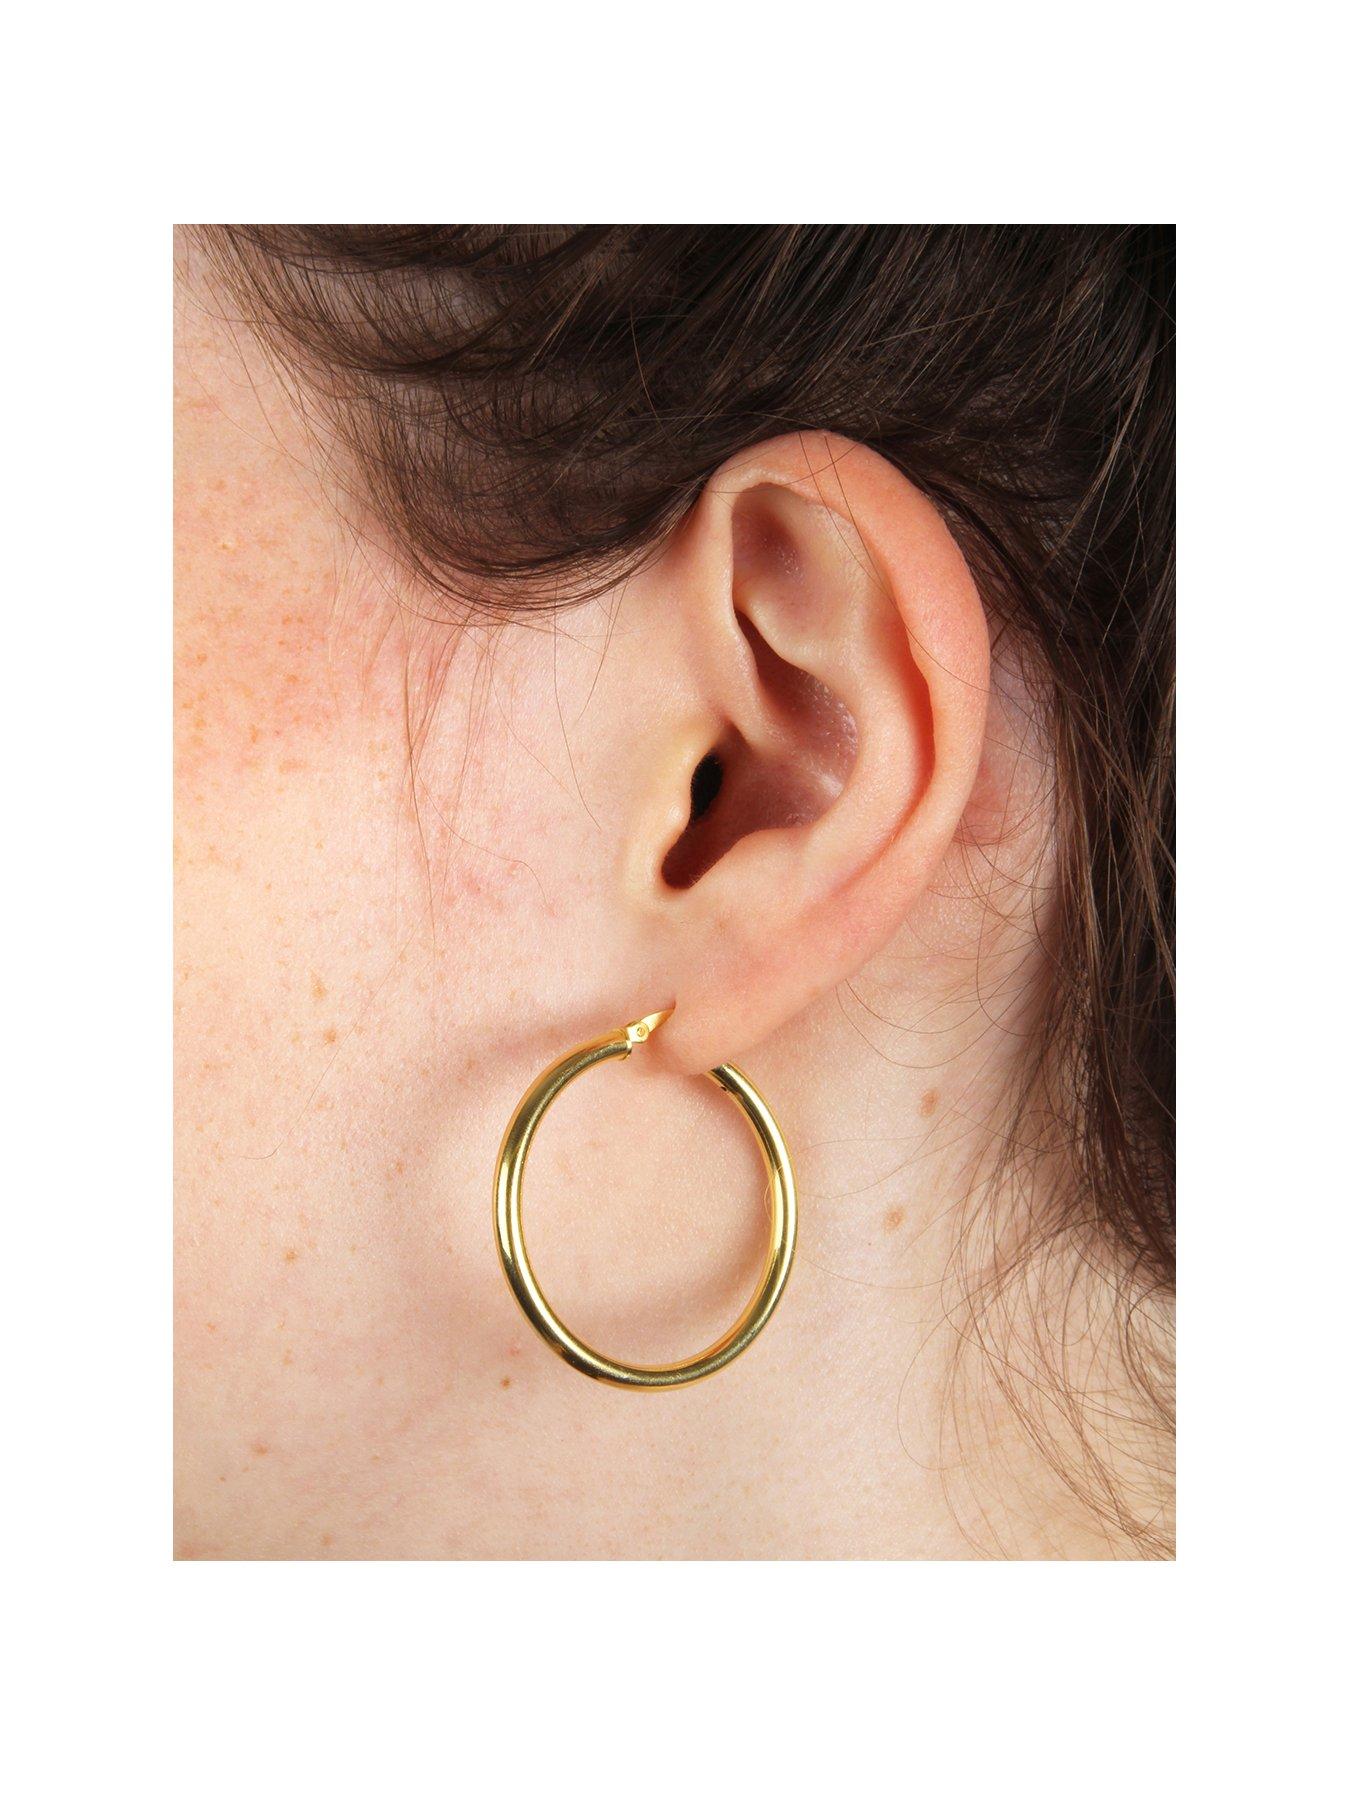 Sterling Silver Gold-flashed Patterned Dented 35mm Hoop Earrings 